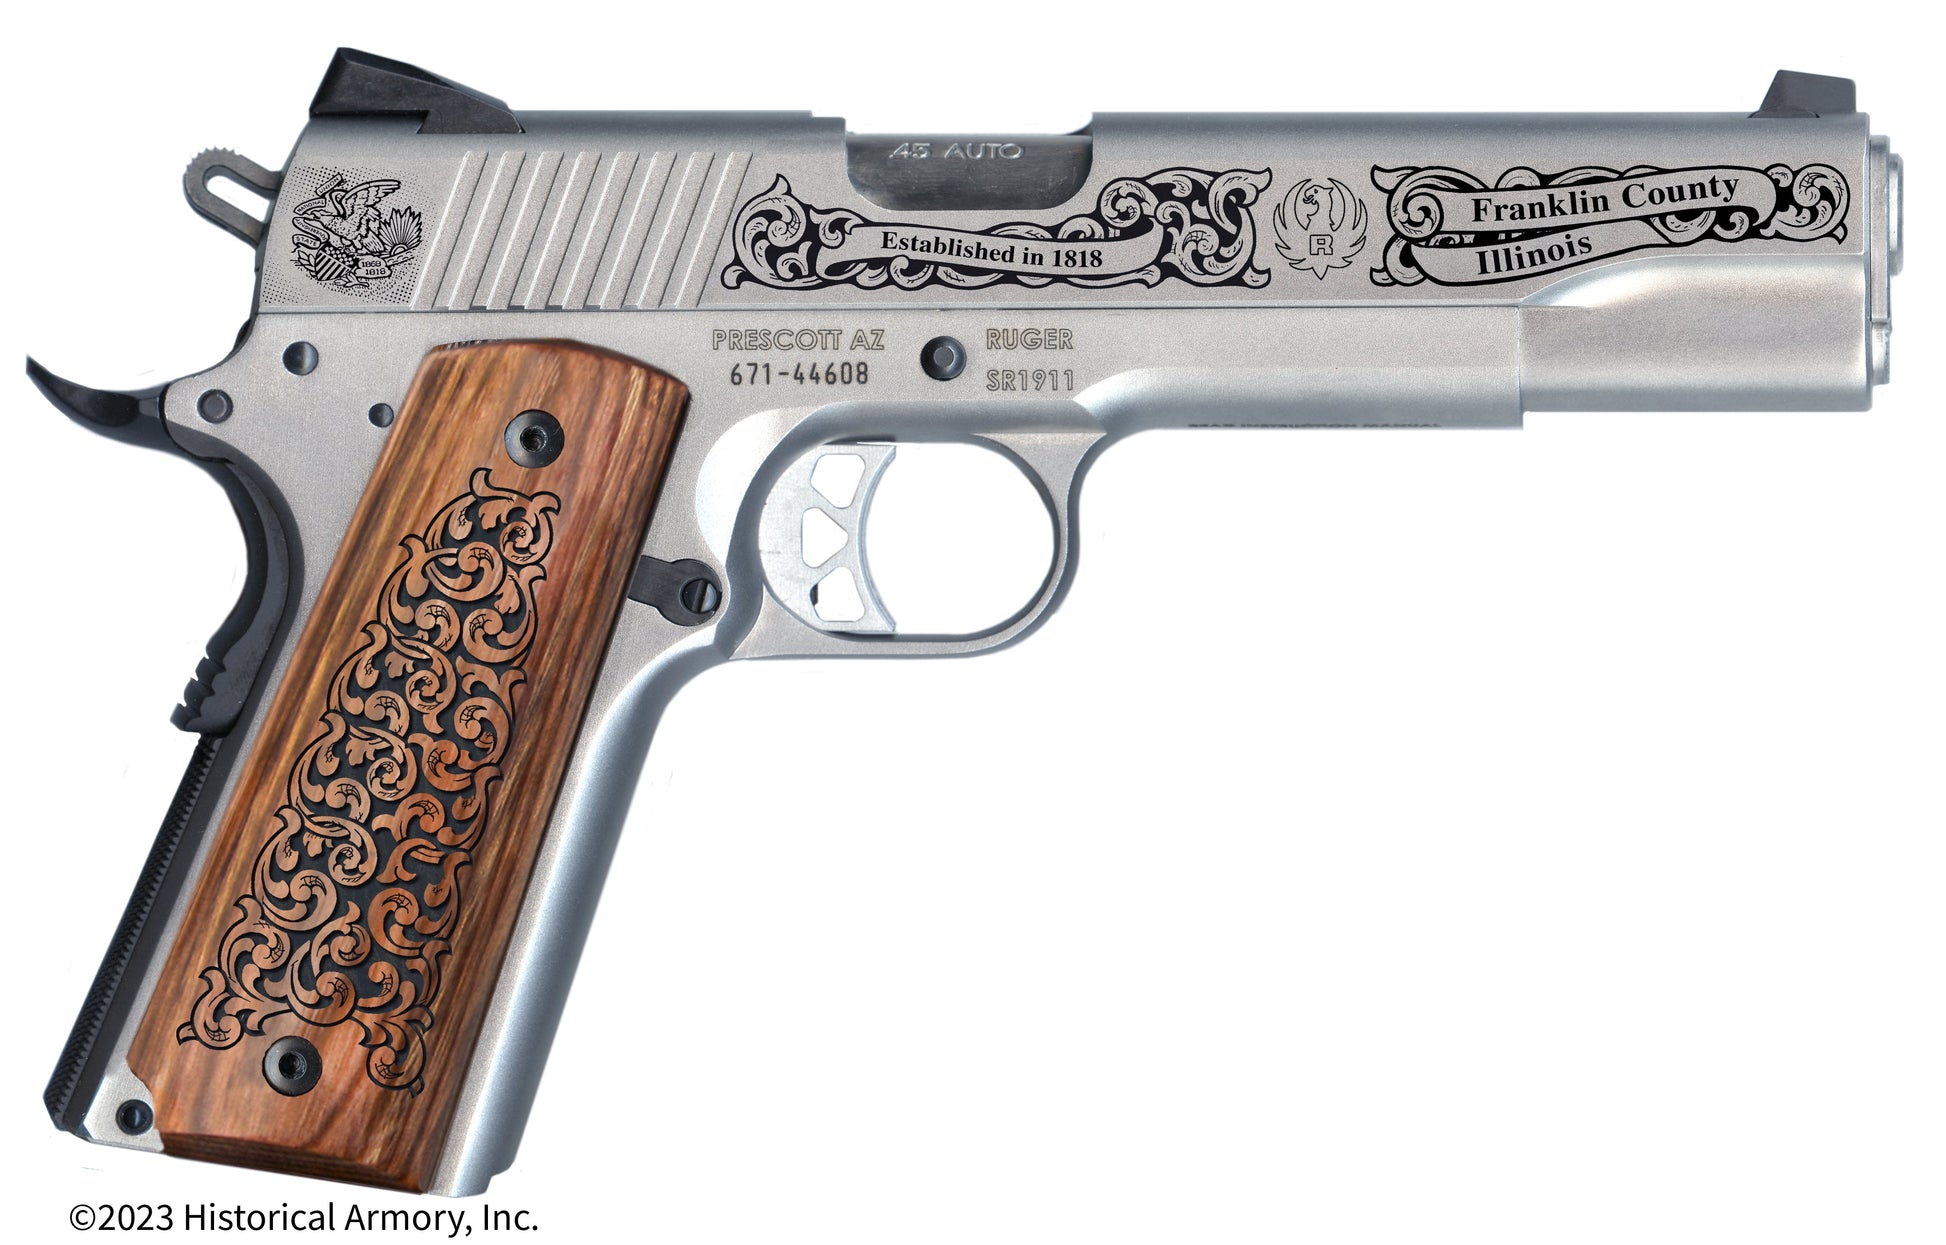 Franklin County Illinois Engraved .45 Auto Ruger 1911